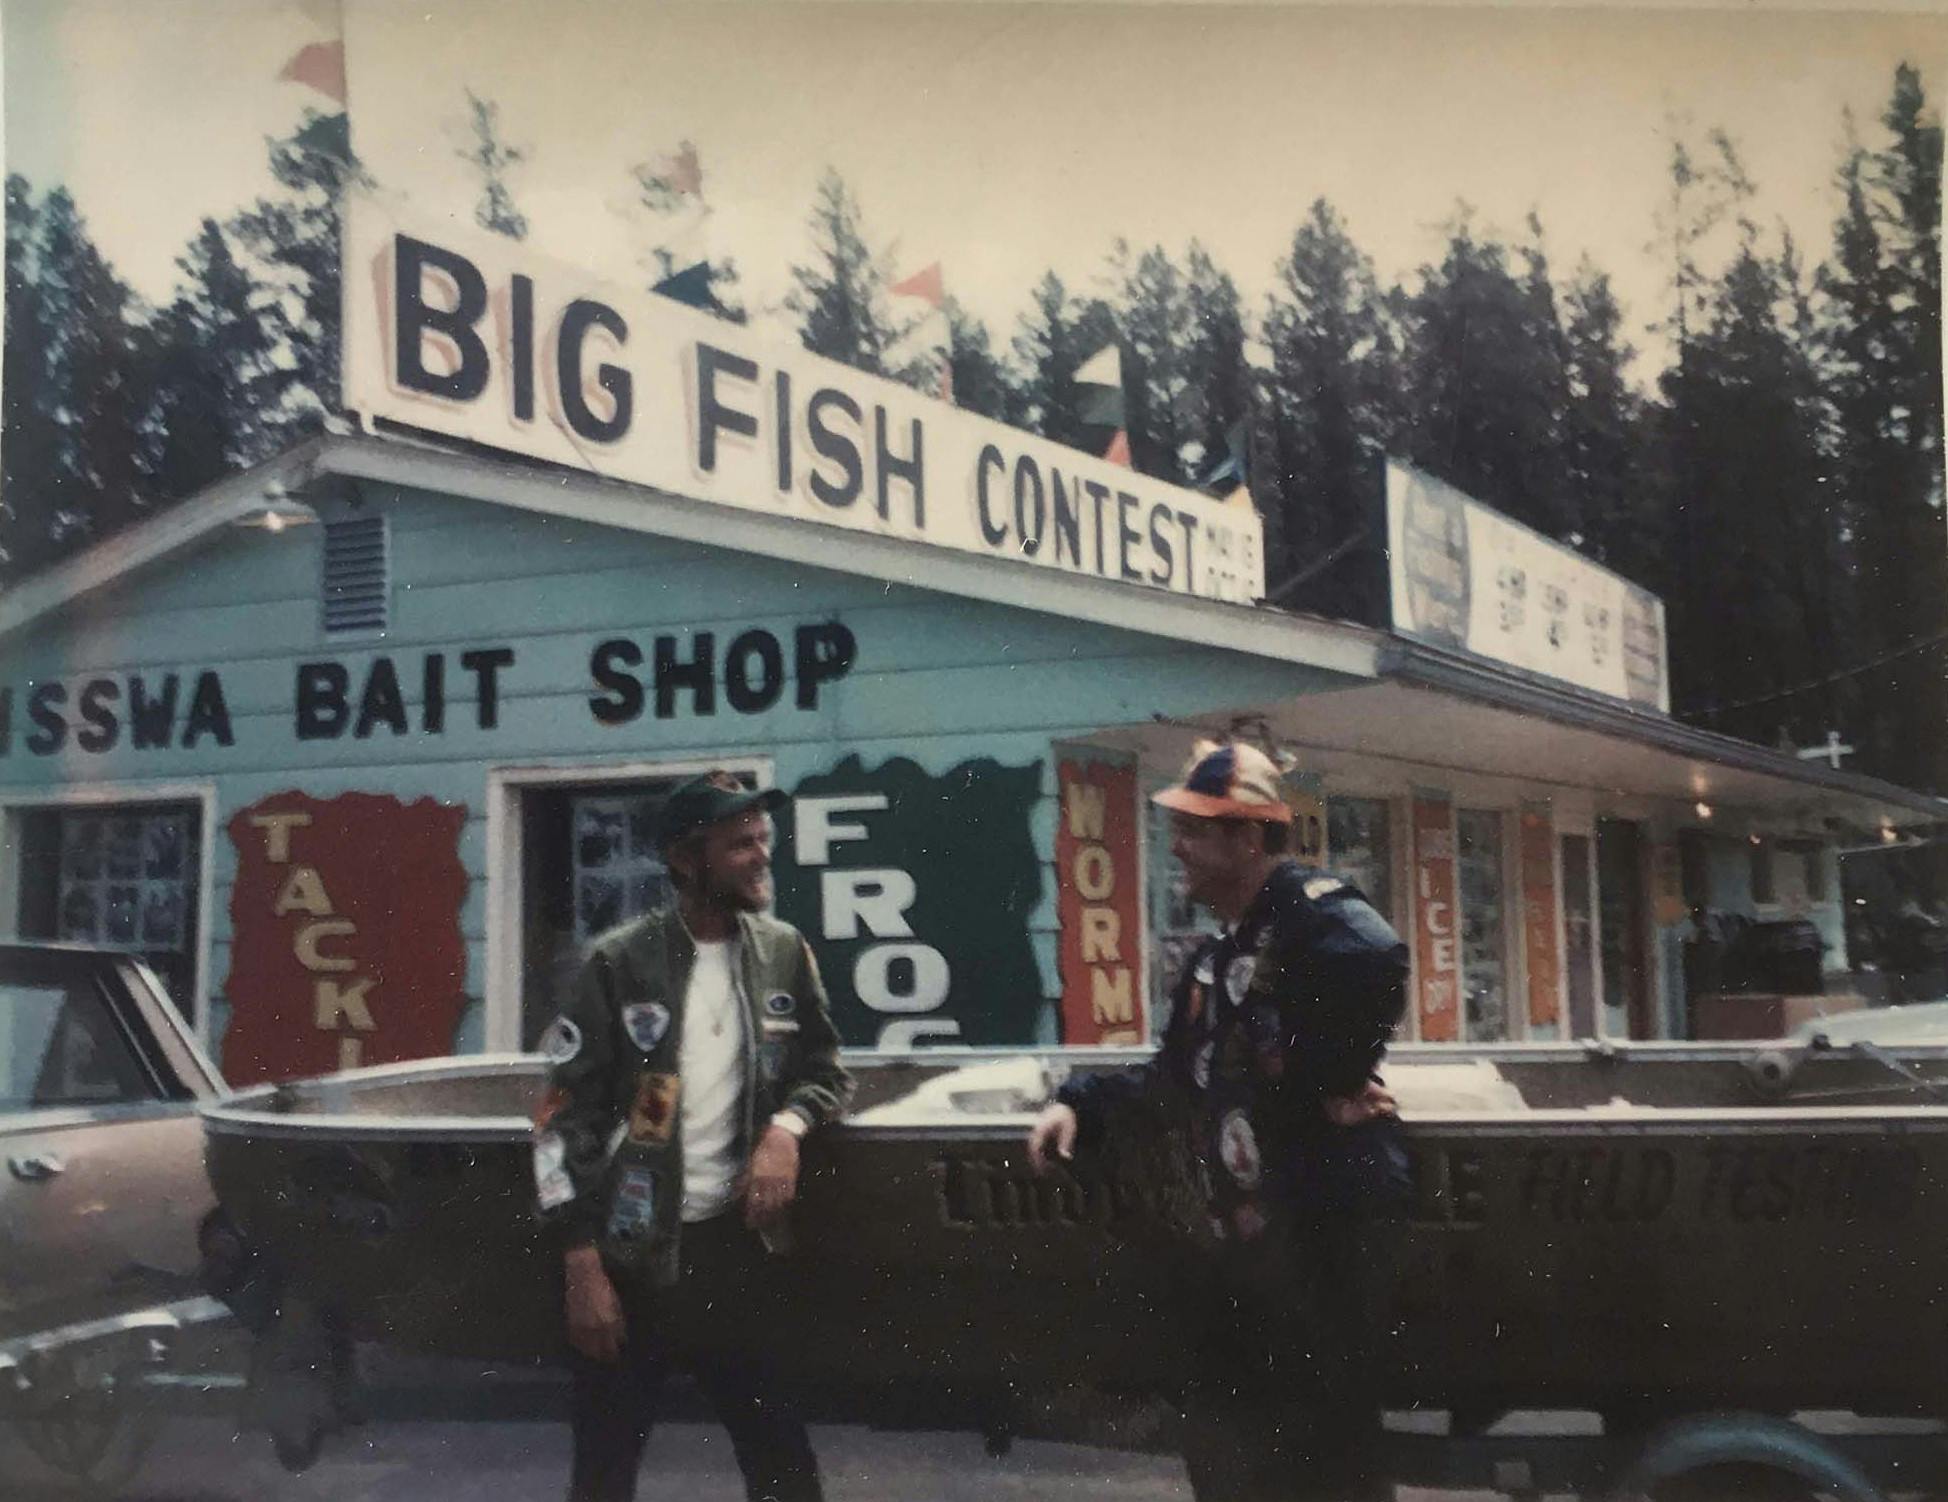 Through the 1970s and on, Nisswa bait shop was epicenter of fishing opener